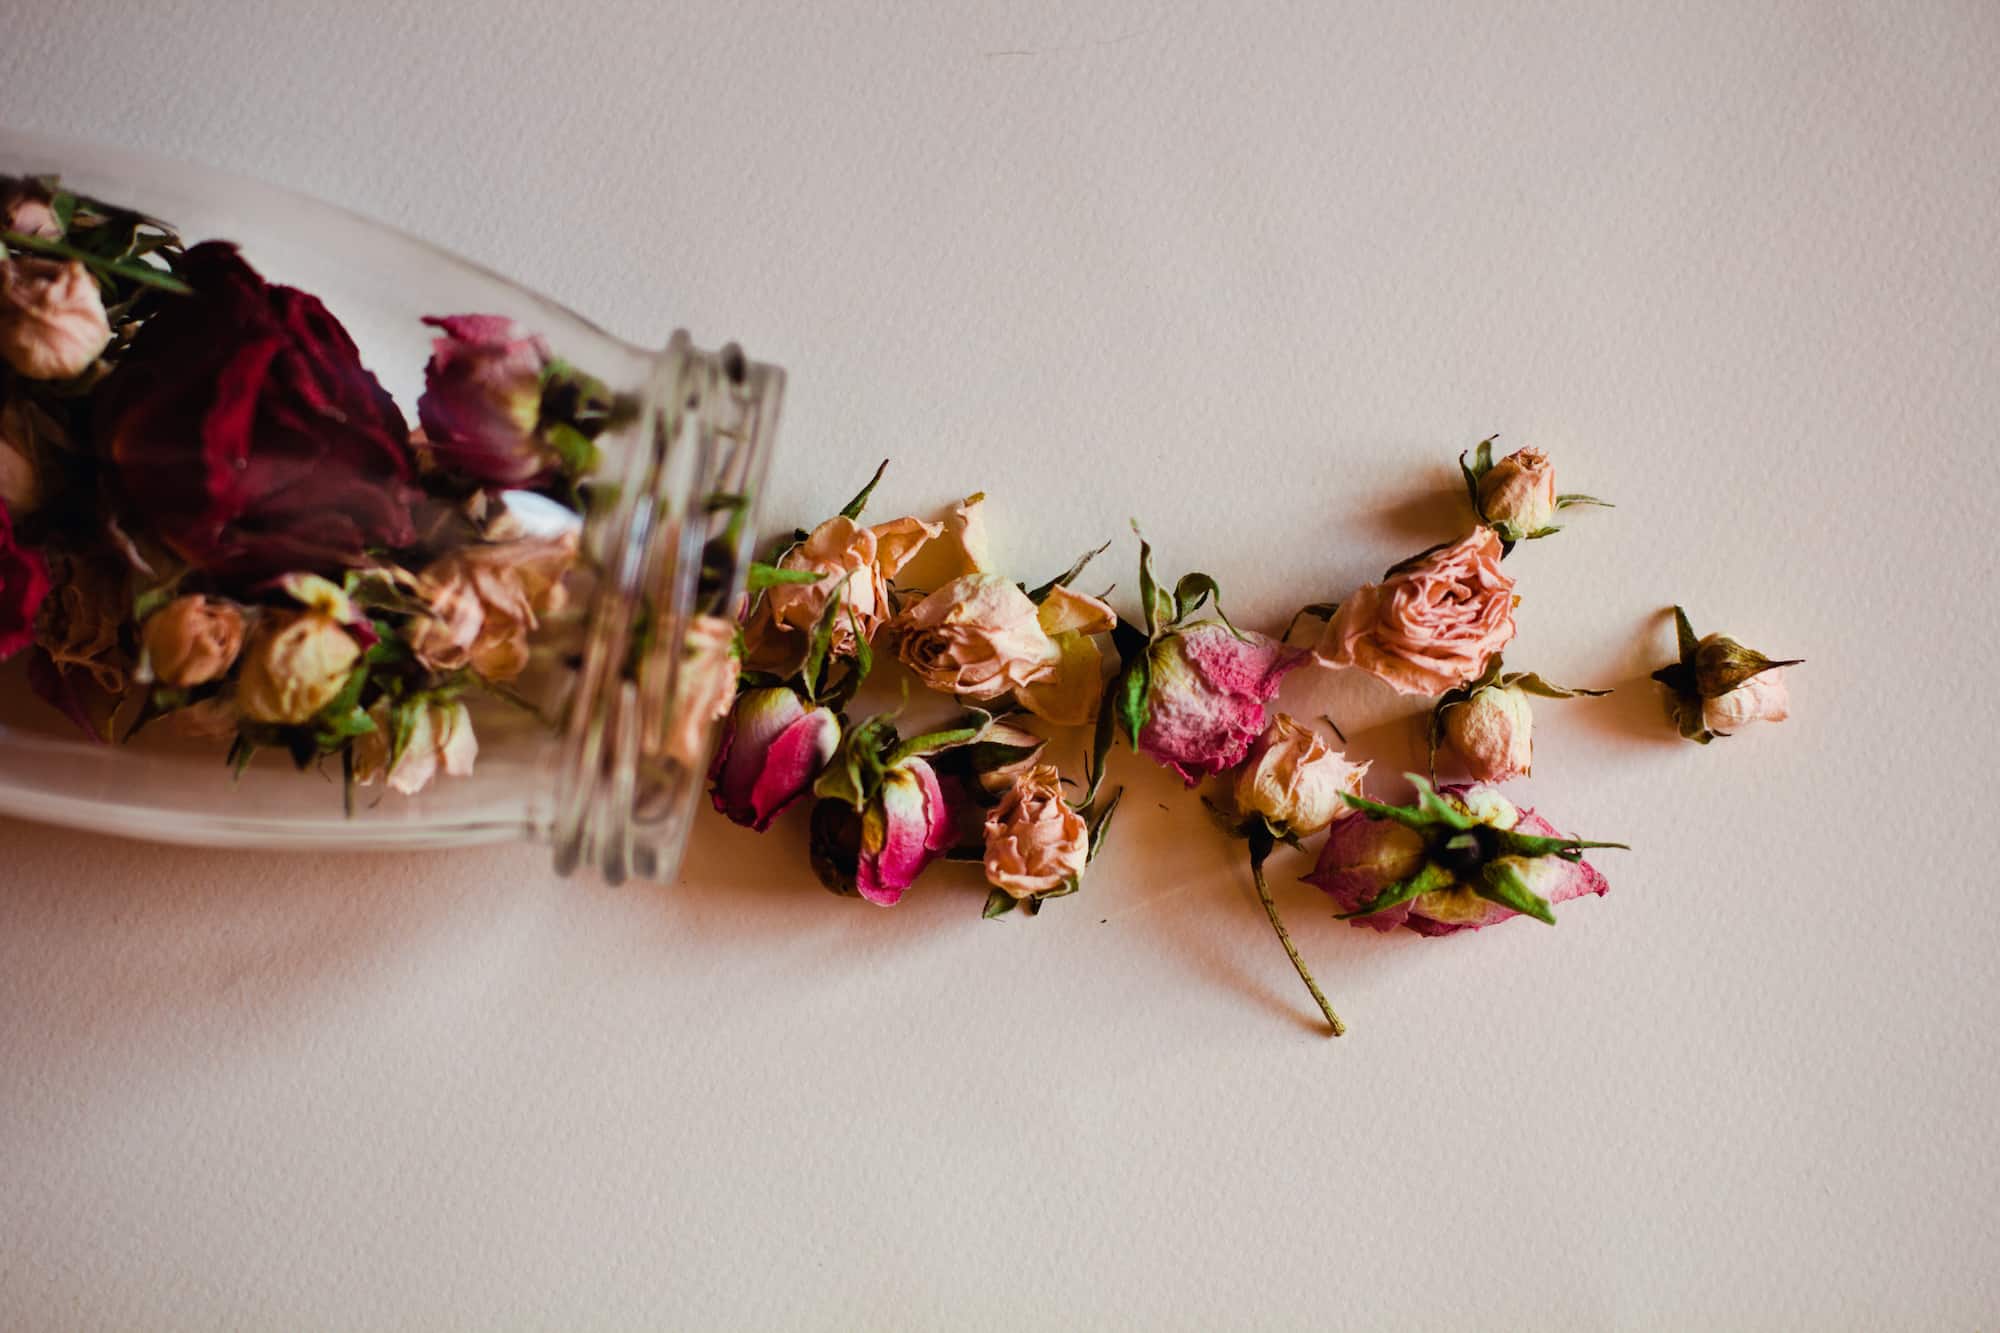 Try Out These Different Ways To Preserve Rose Petals At Home – VedaOils